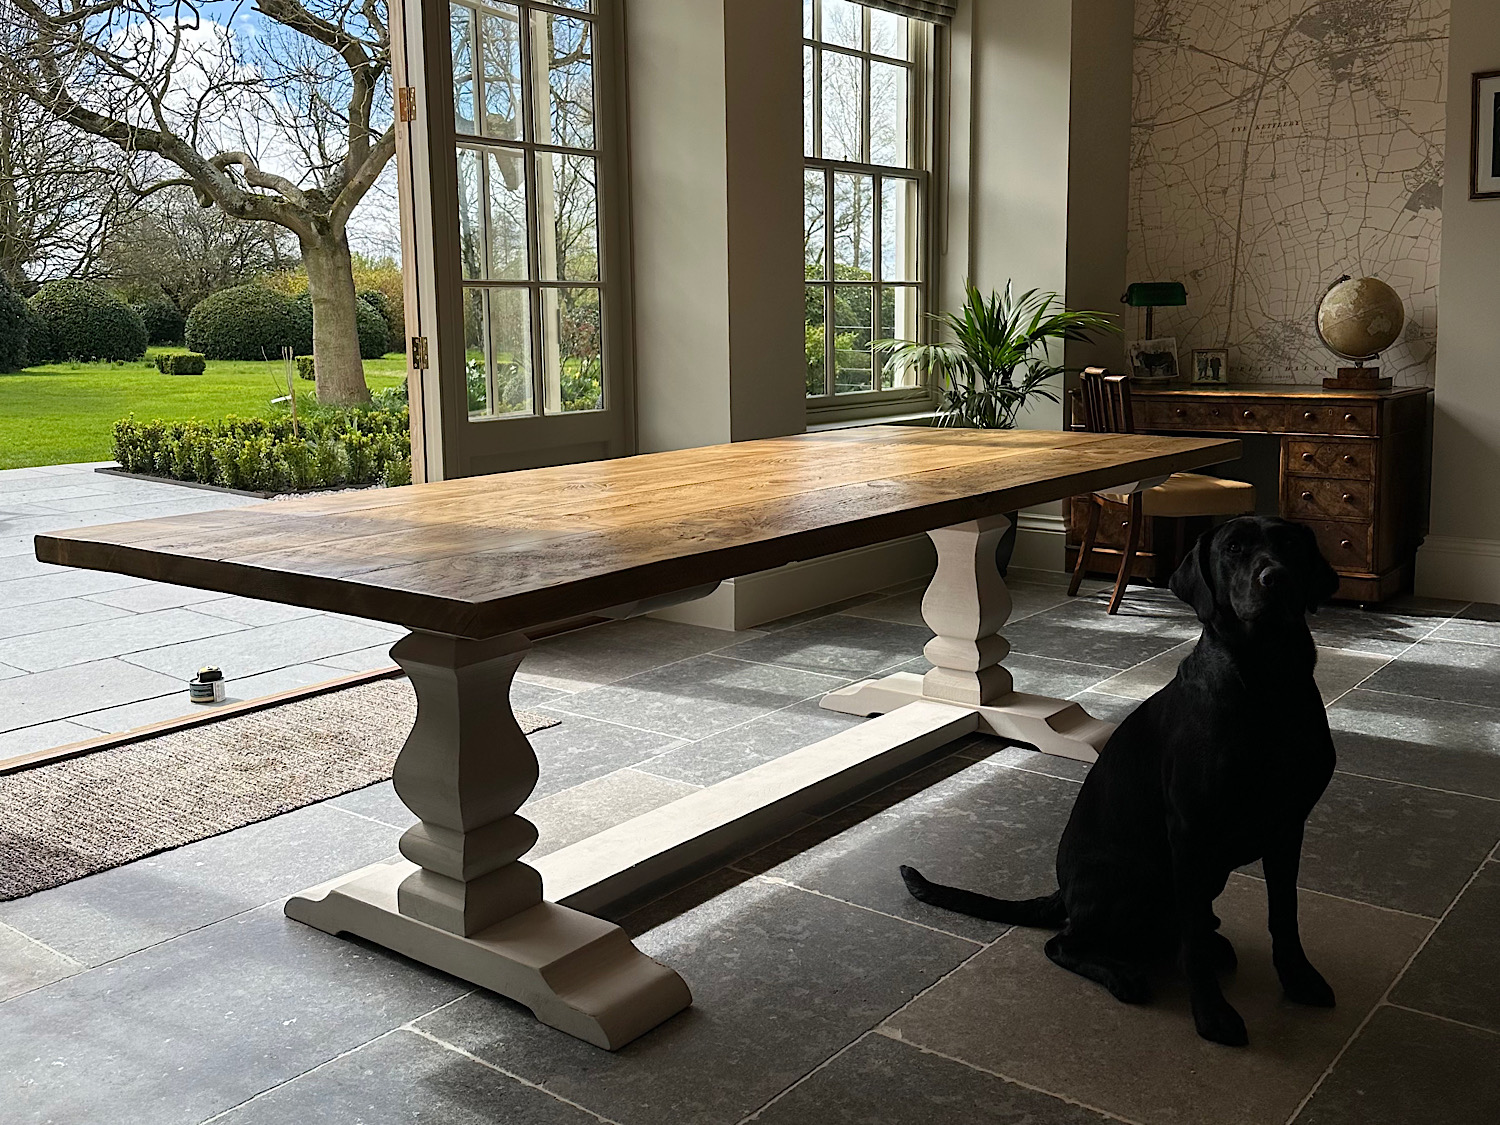 The favoured table for your home is by Tom Marsh Furniture, voted by dogs.